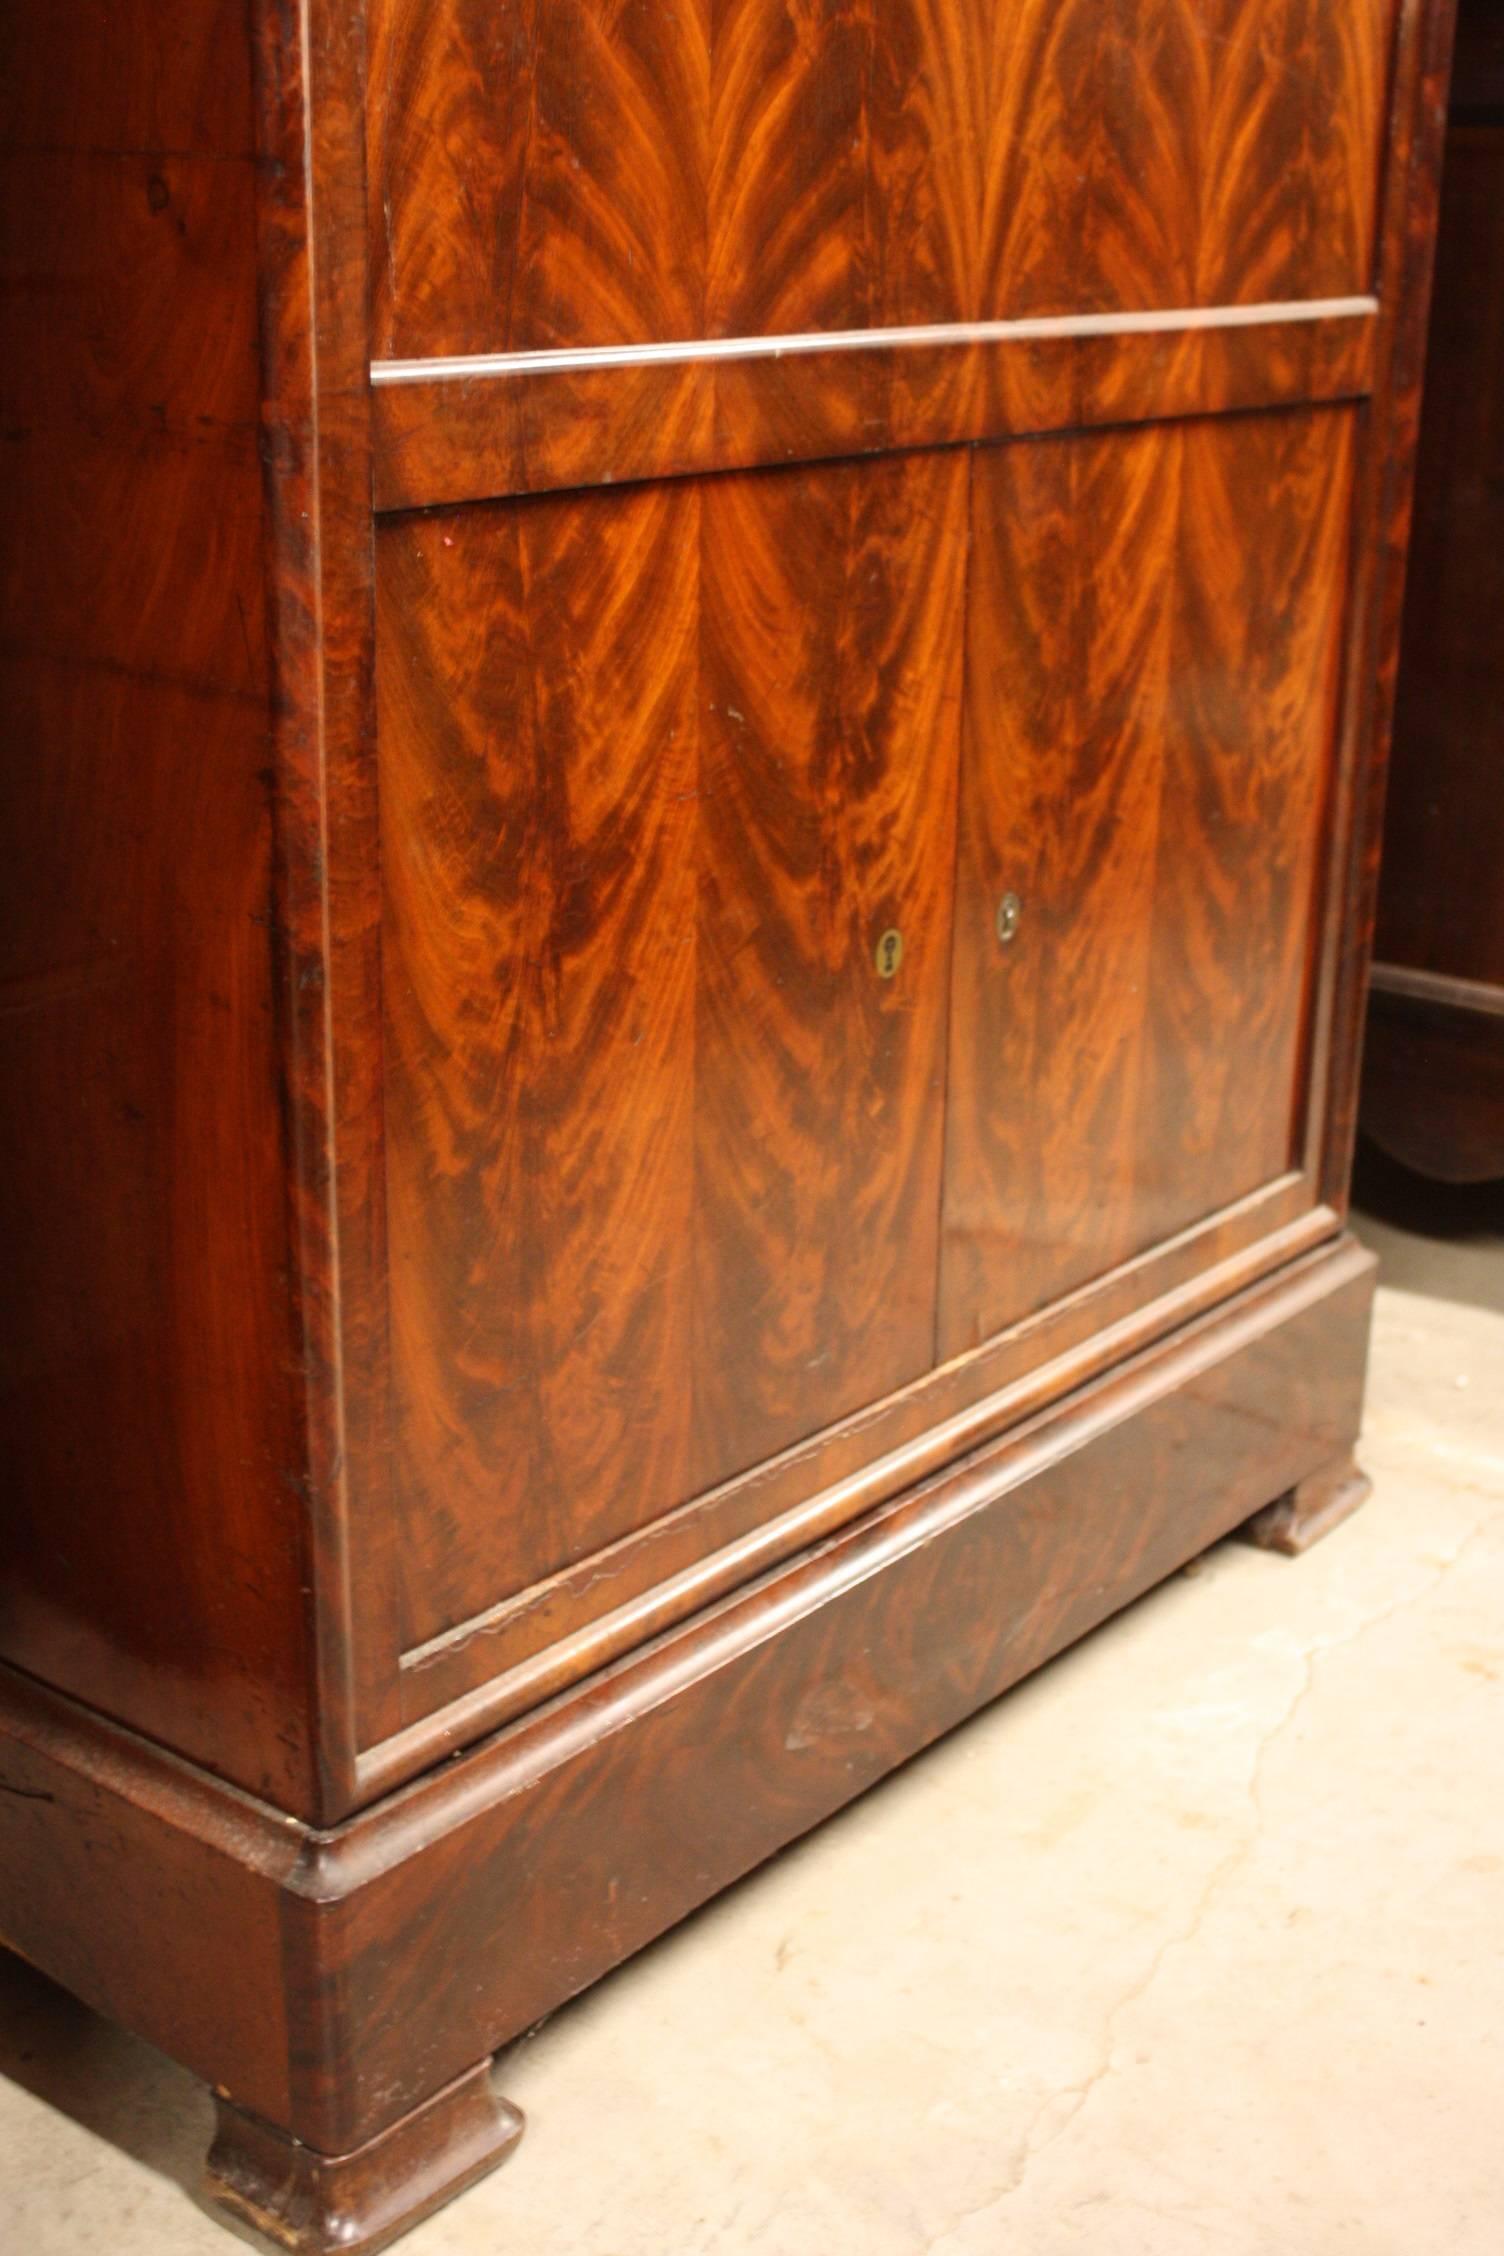 French Empire style mahogany secretary with marble top has lower cabinets which are lockable (key included) and the single hidden drawer at the top. The interior has document and accessory storage drawers.